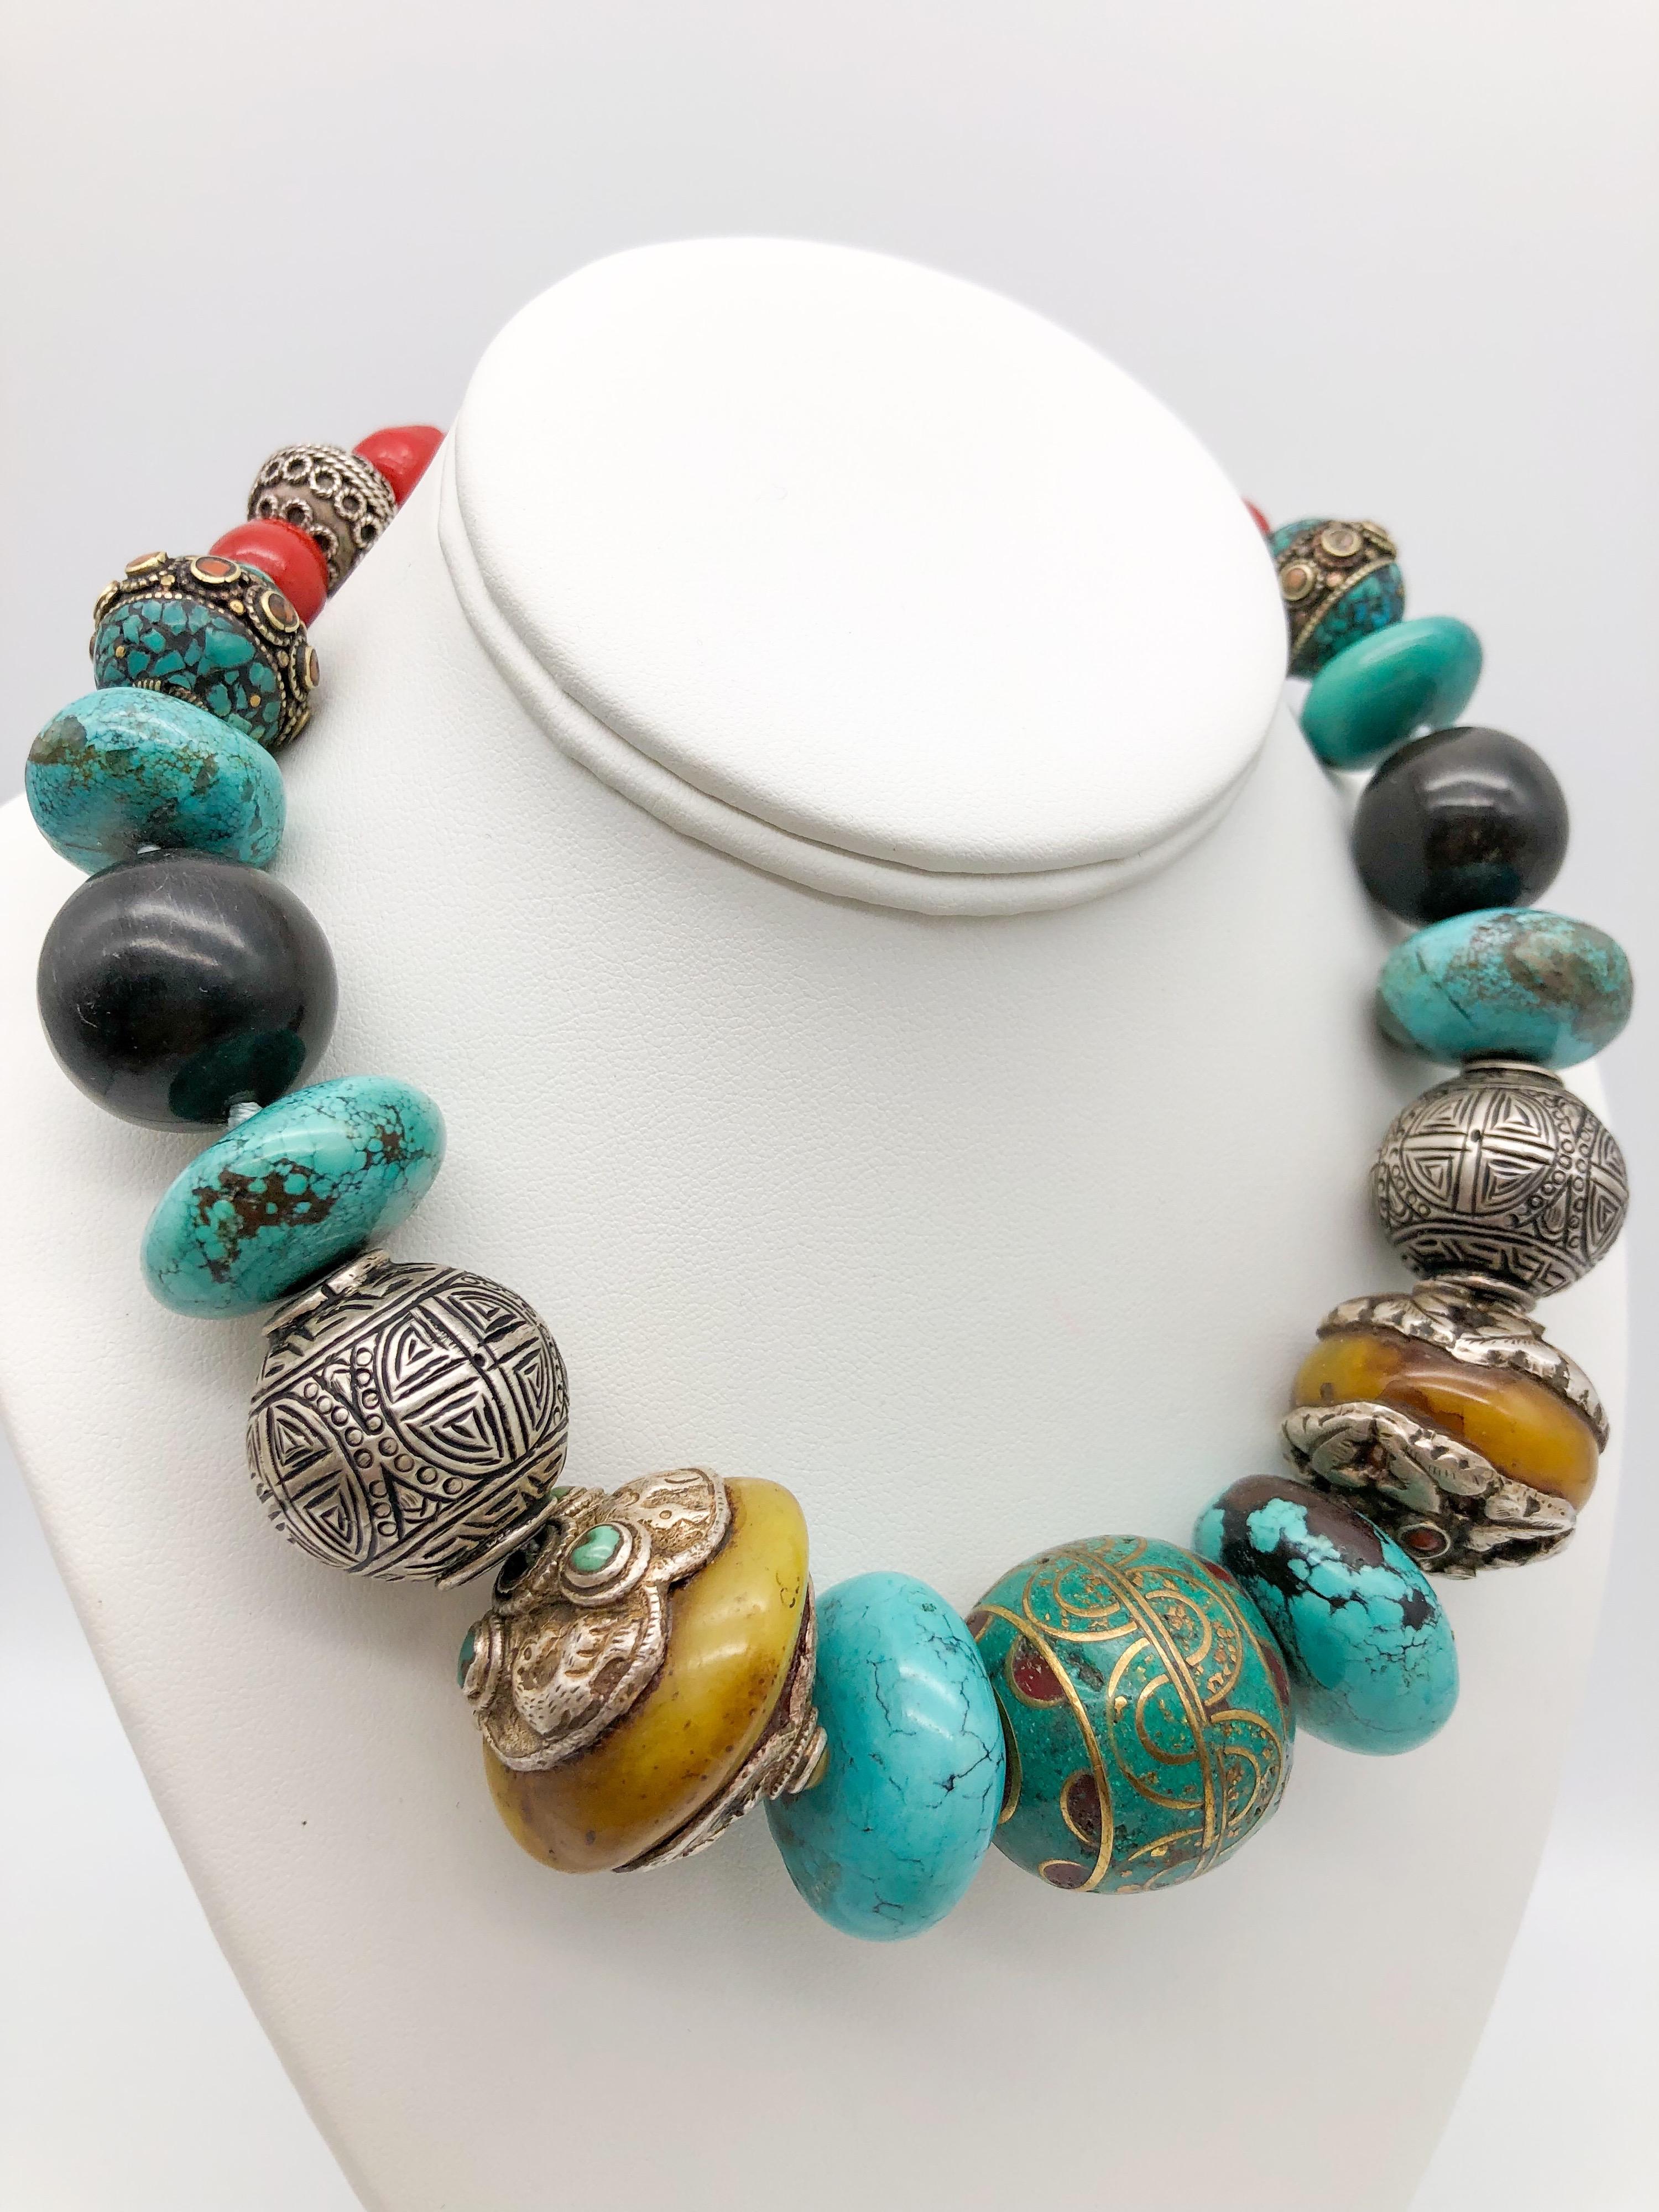 
One-of-a-Kind
Bold necklace with a large center bead of Tibetan, Cloisonné surrounded by Tibetan Silver and Amber beads large turquoise discs, Onyx beads, Red Chinese stones, Sterling Silver beads, Tibetan beads  inlaid with turquoise . The box